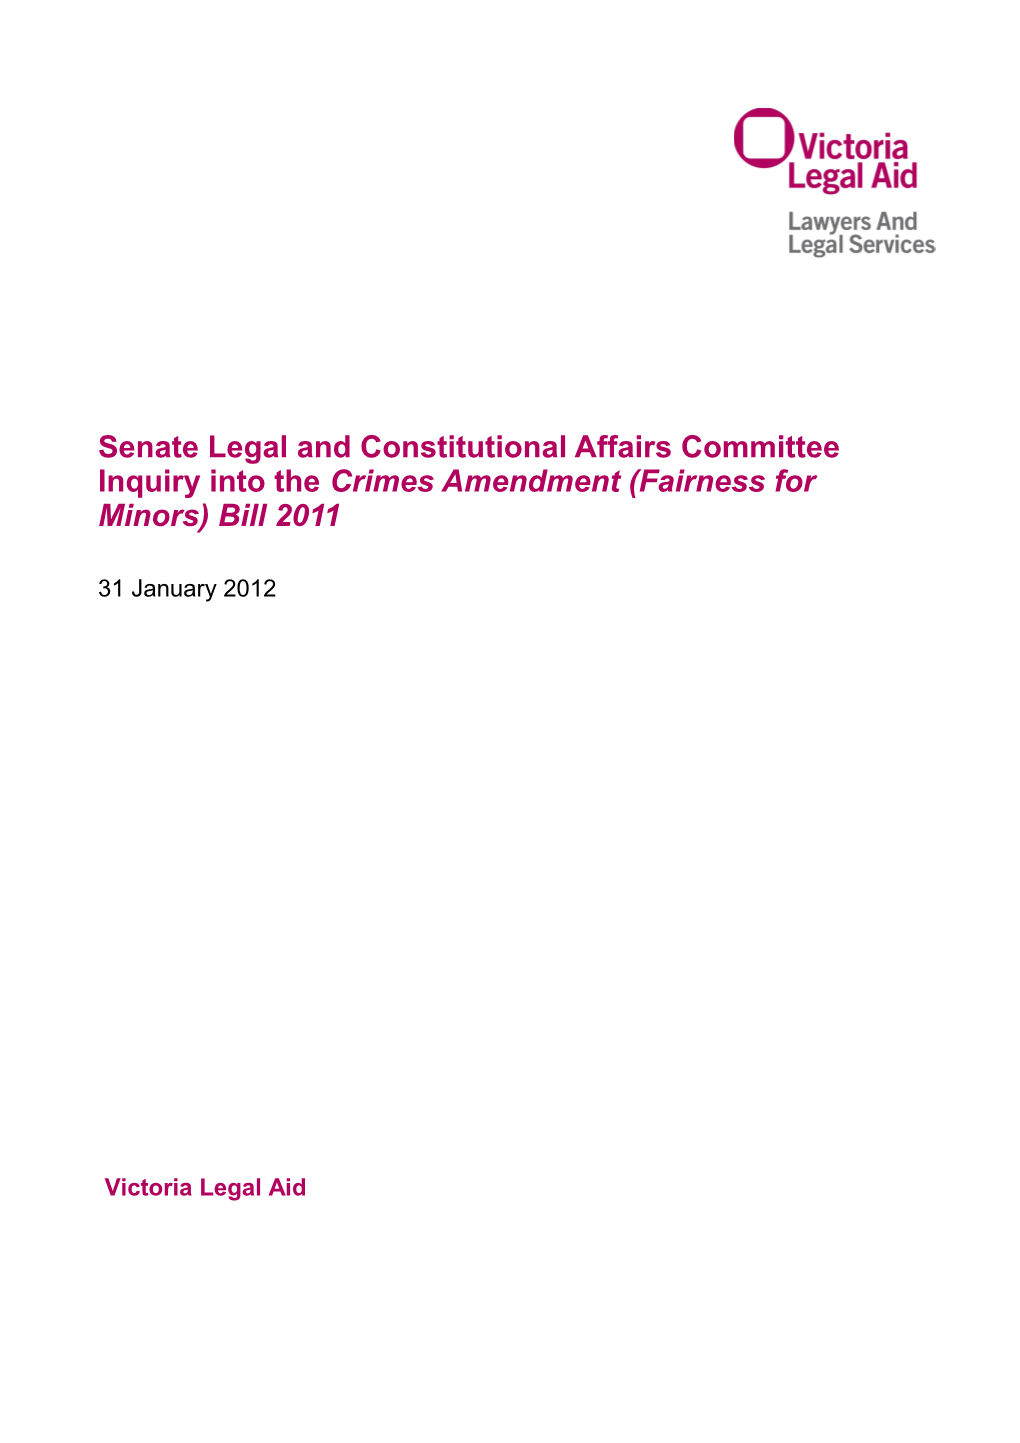 Senate Legal and Constitutional Affairs Committee Inquiry Into the Crimes Amendment (Fairness